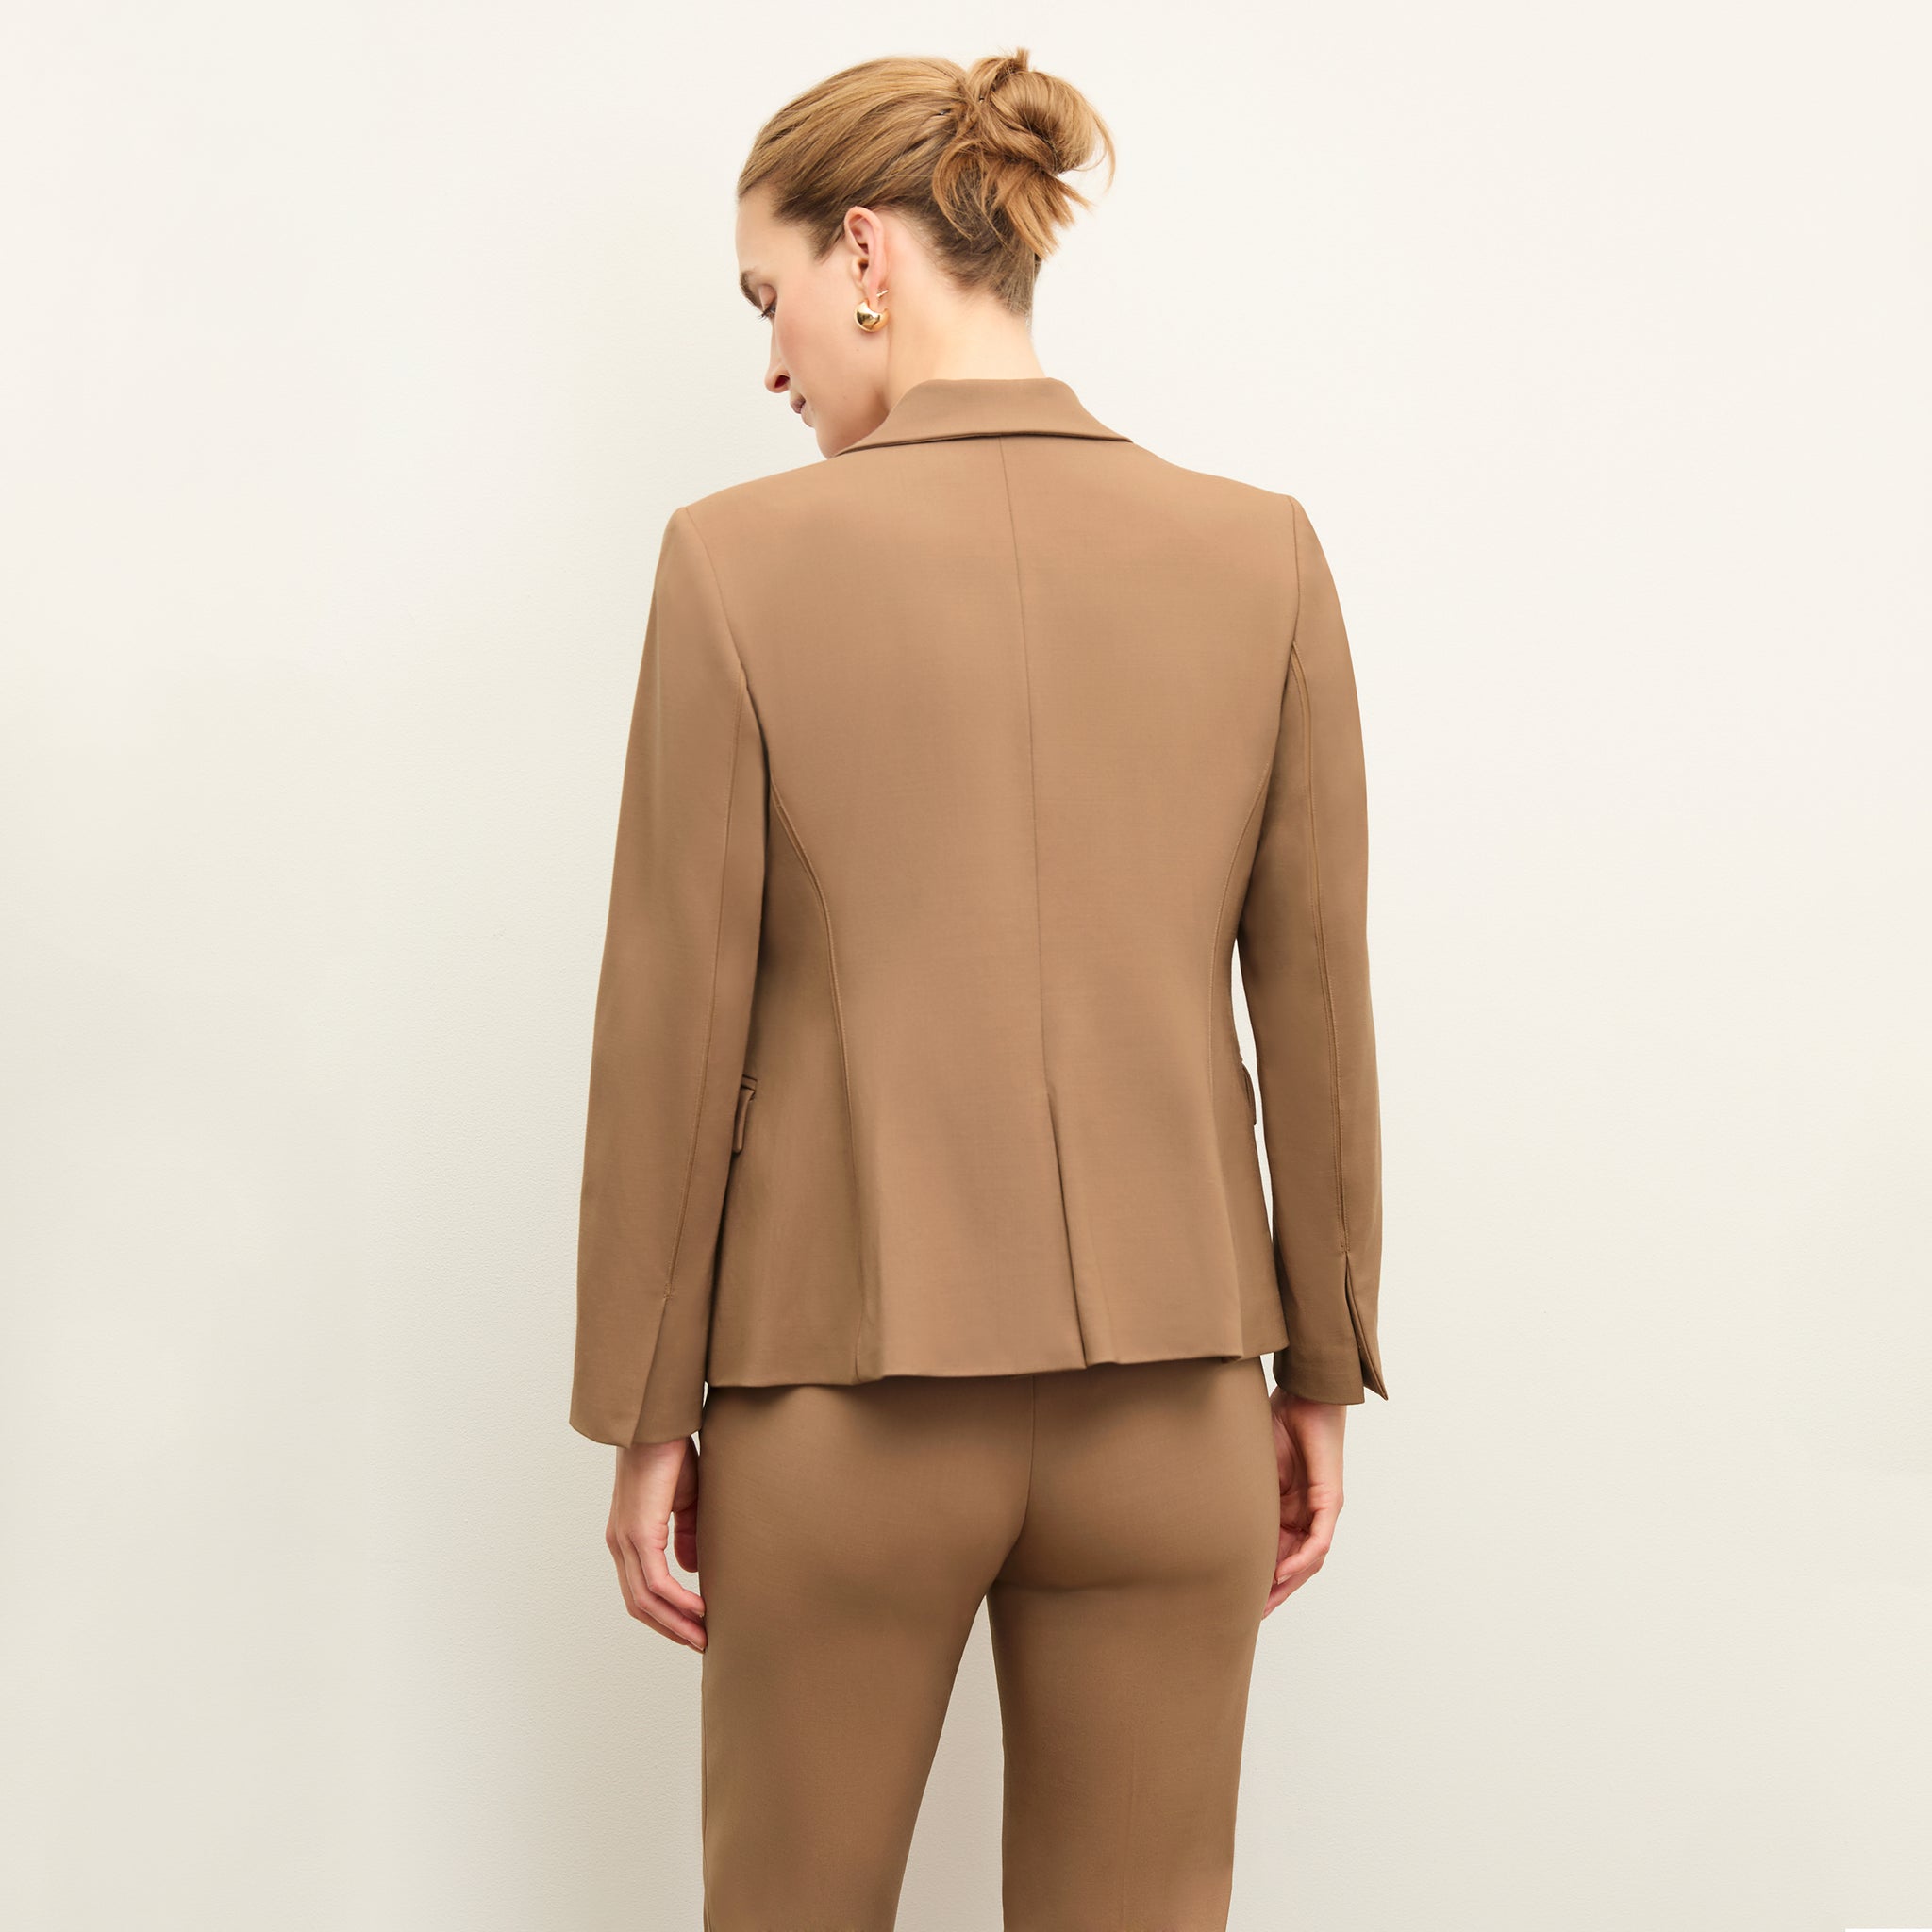 back image of a woman wearing the yasmine blazer in camel